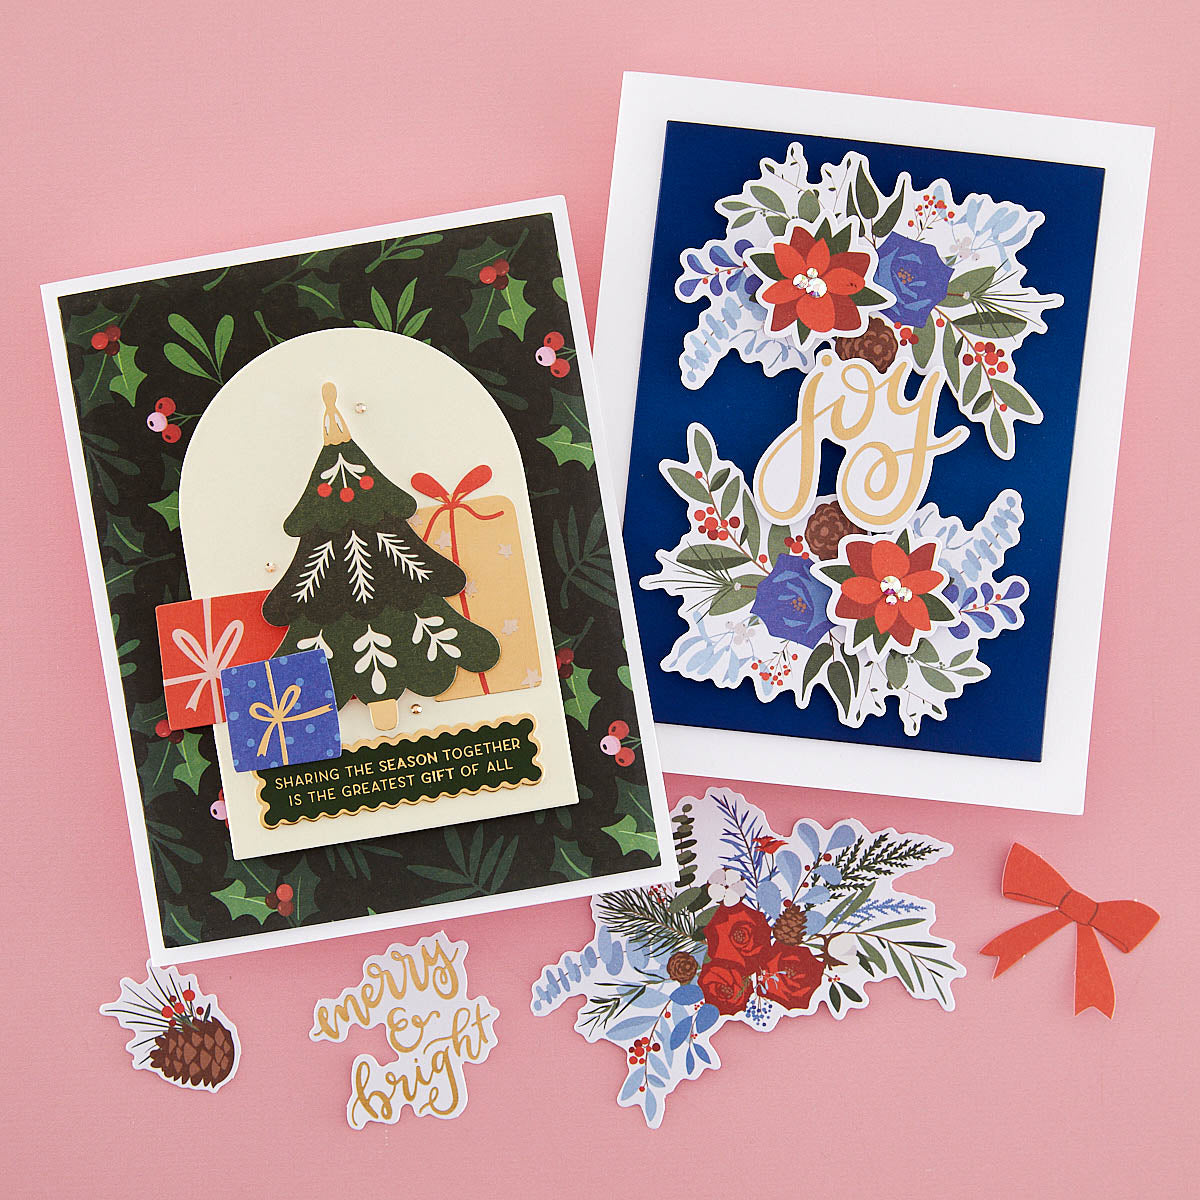 Nutcracker Ballet Printed Die Cuts from the Nutcracker Sweet Collection